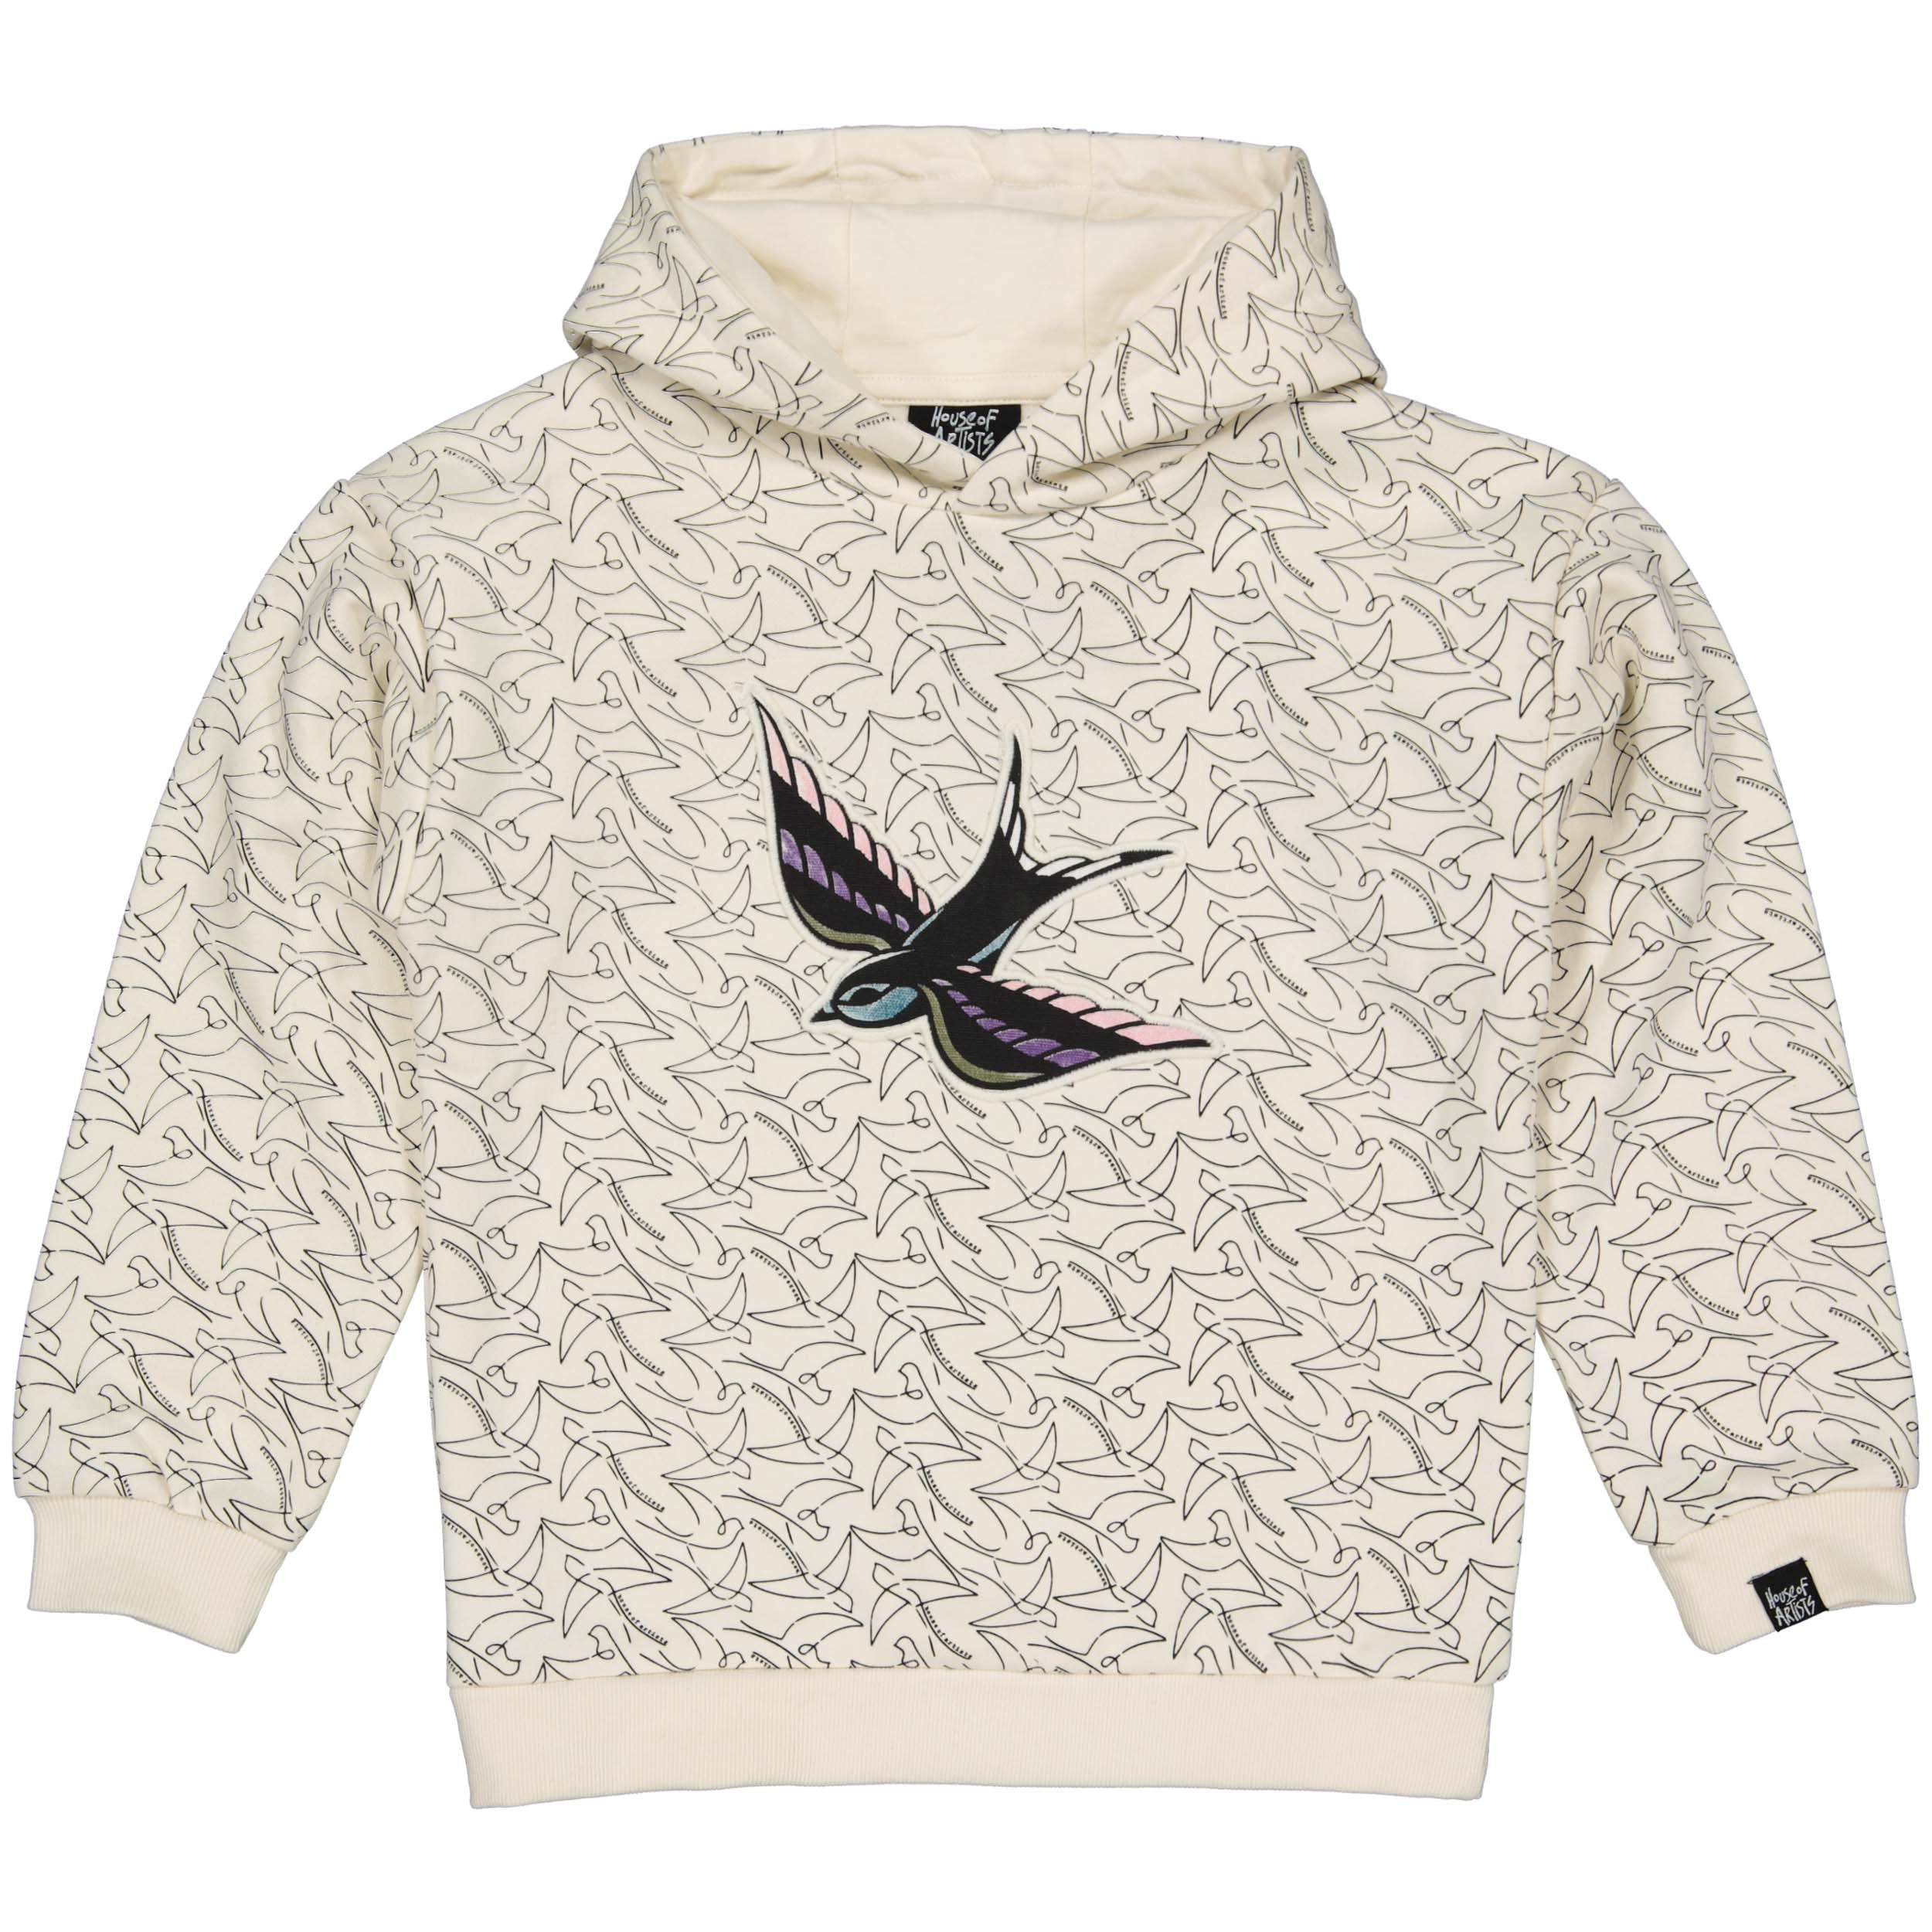 Unisexs Hooded Sweater Off White van House of Artists in de kleur Off White in maat 170-176.